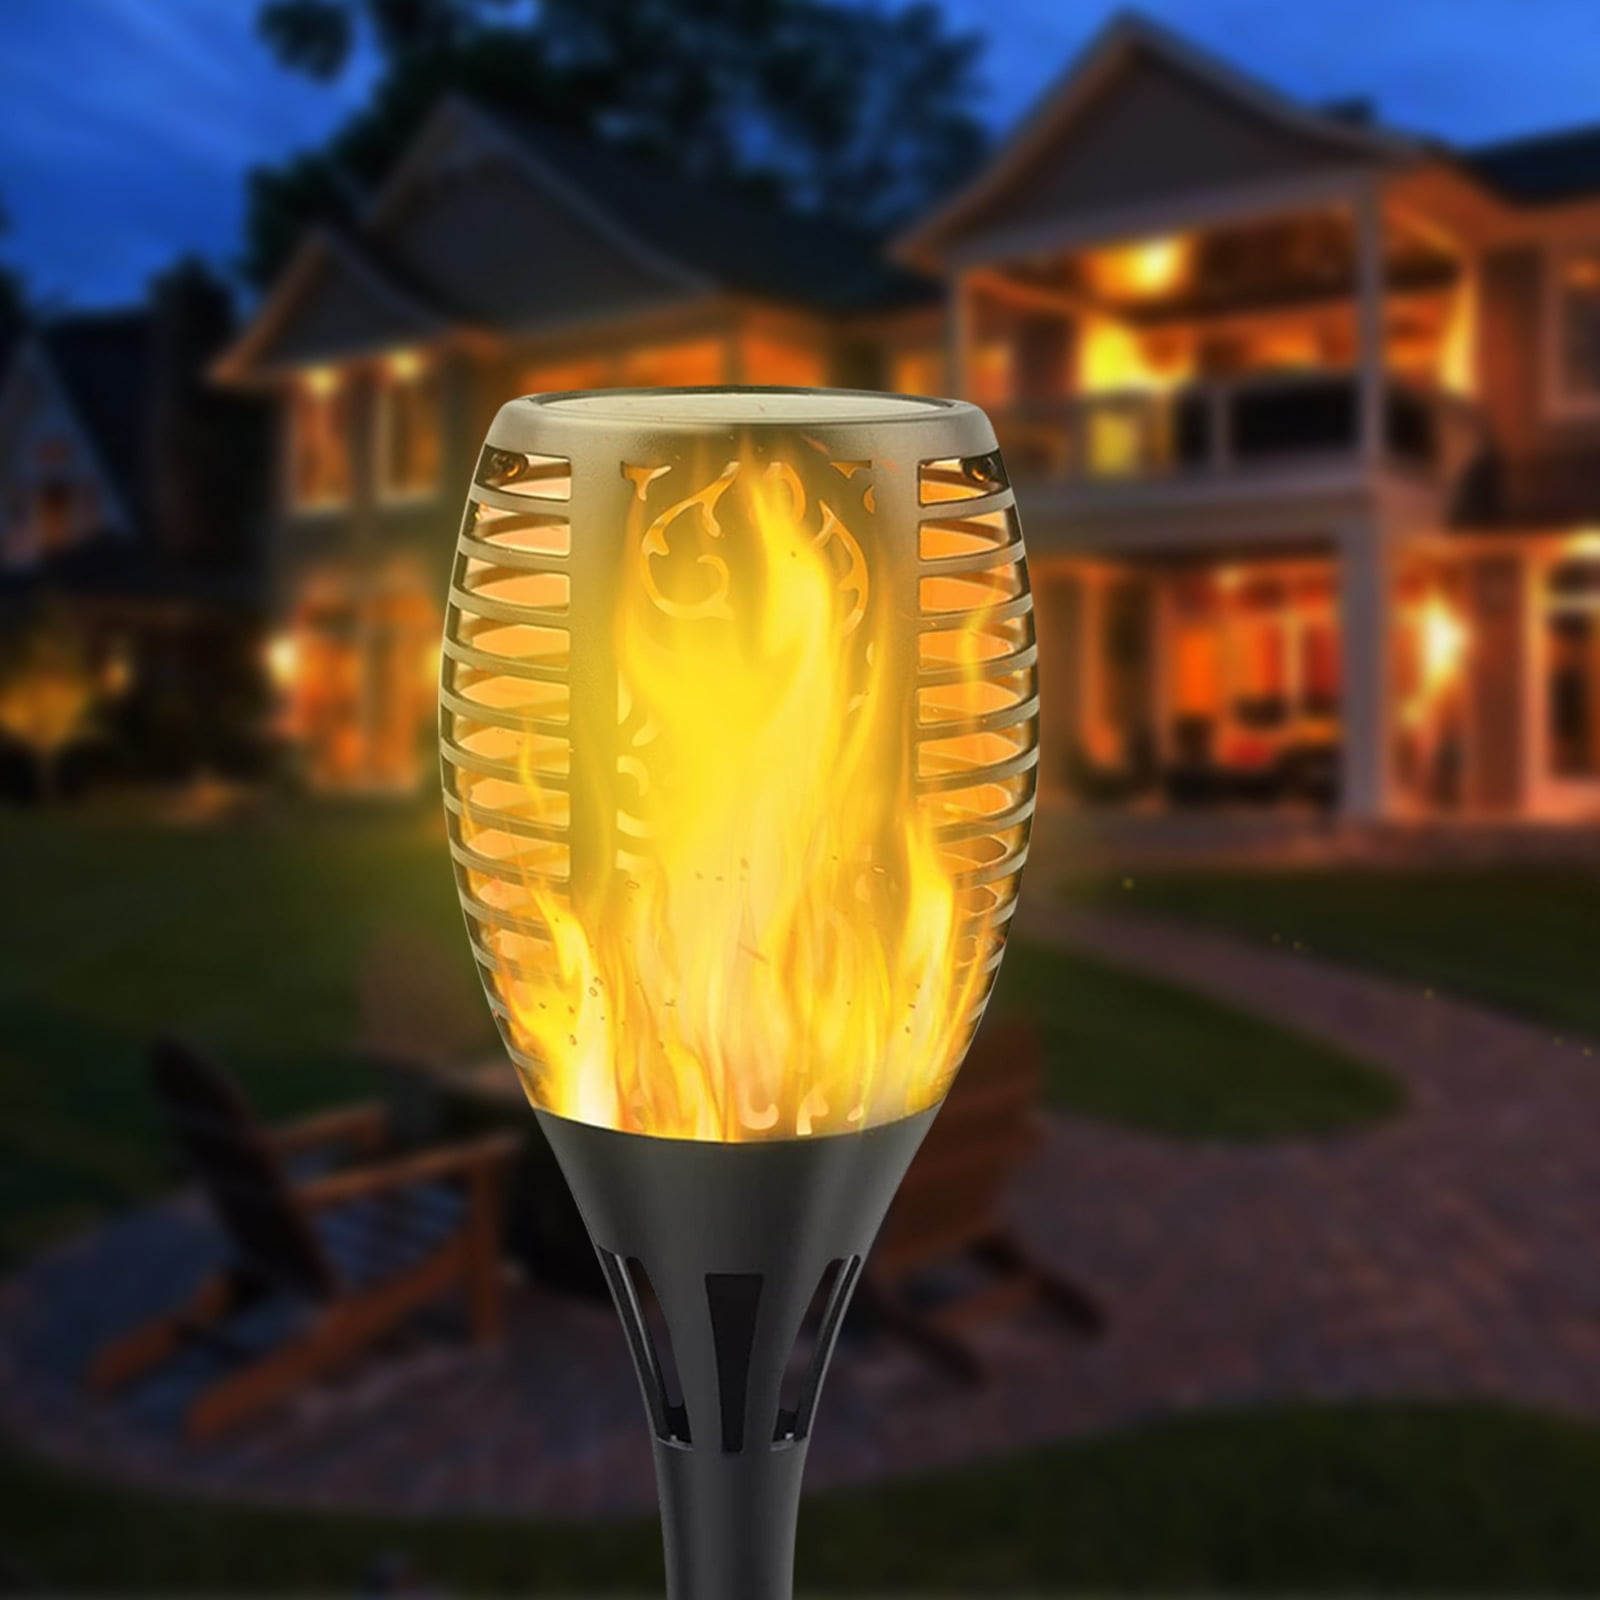 96 LED Waterproof Flickering Flames Solar Lights Outdoor Solar Spotlights Landscape Decoration Lighting Dusk to Dawn Auto On/Off Security Torch Light for Patio Garden Driveway Solar Torch Lights